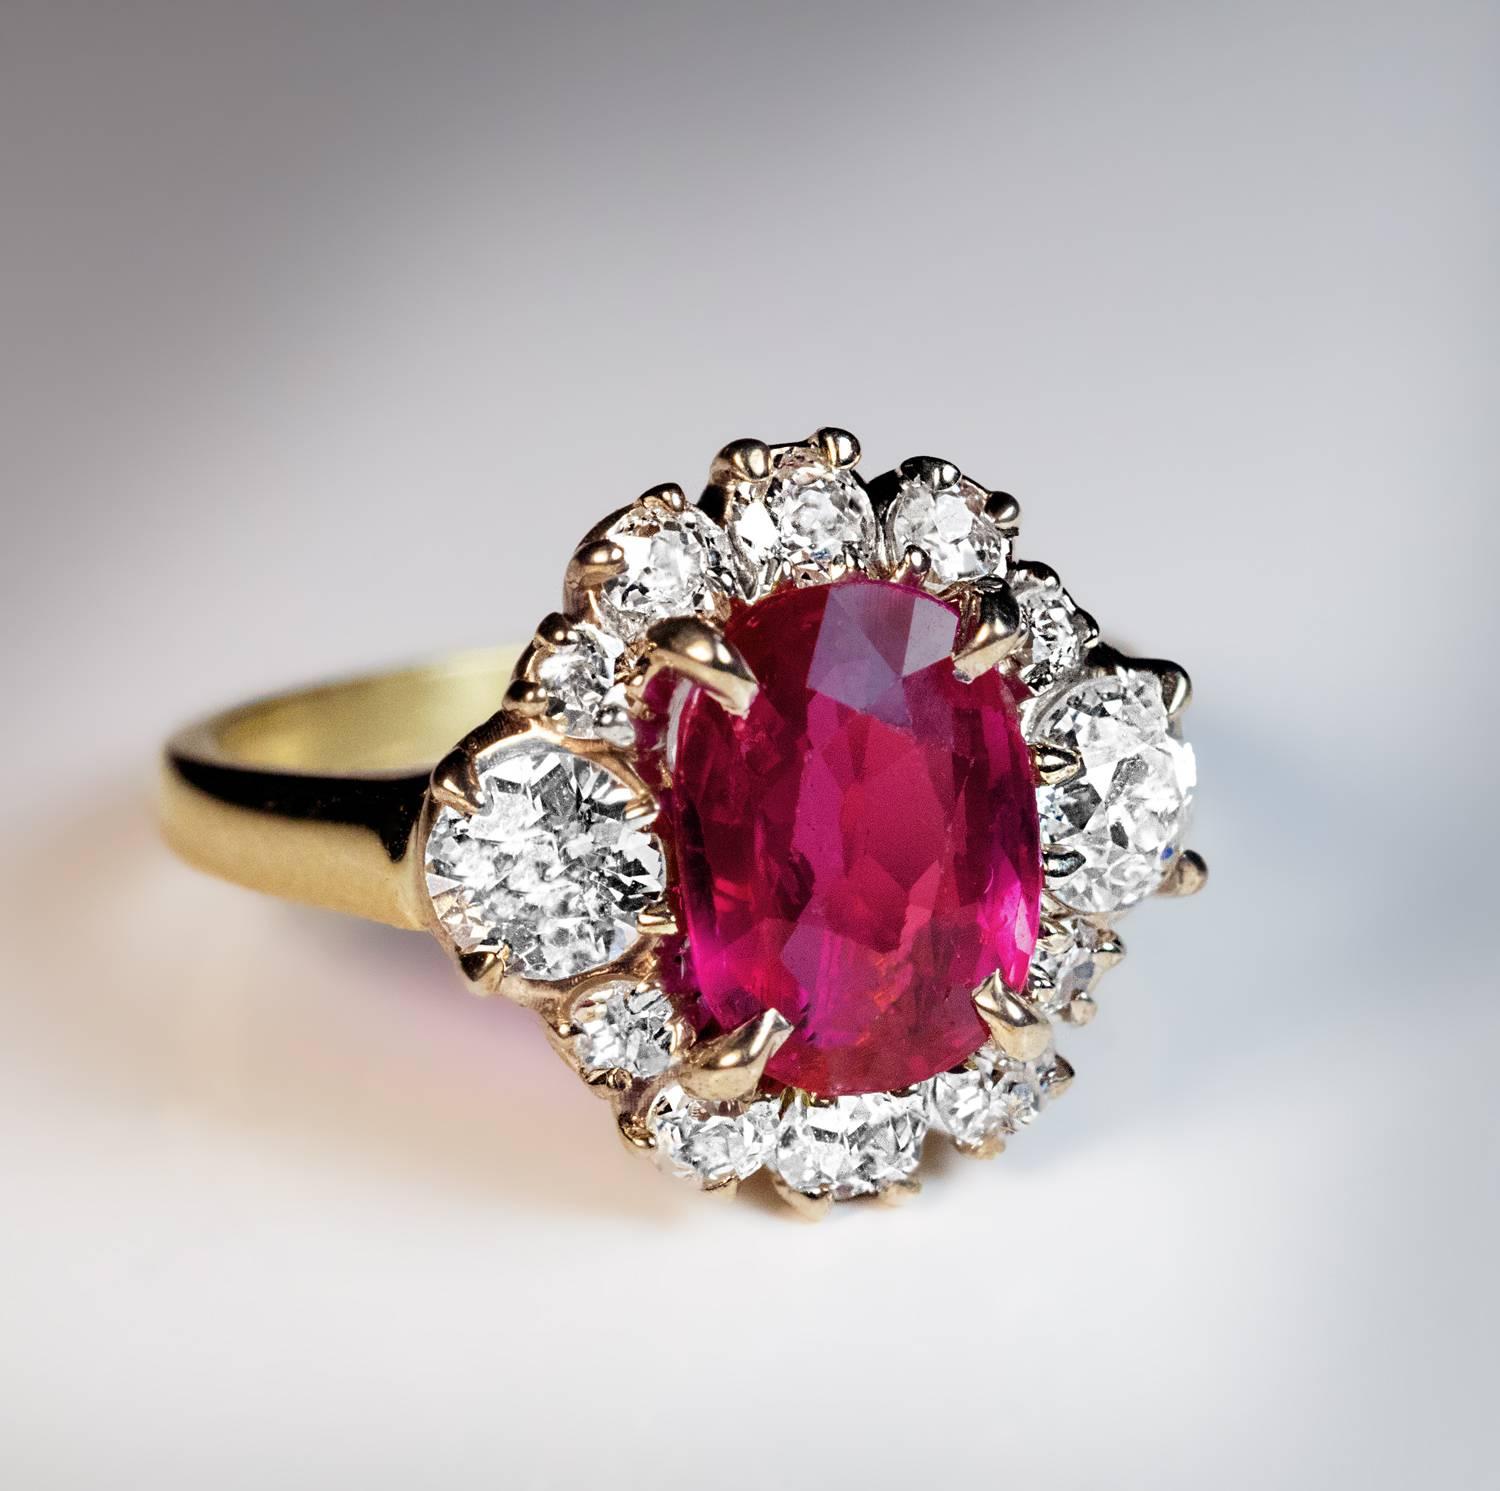 A silver topped 18K gold ring is centered with an oval natural unheated pink-red 2.71 ct ruby from Burma (Myanmar). The ruby is framed by bright white (F-G color) old mine cut diamonds (estimated total weight 1.25 ct).

The ring comes with AGL